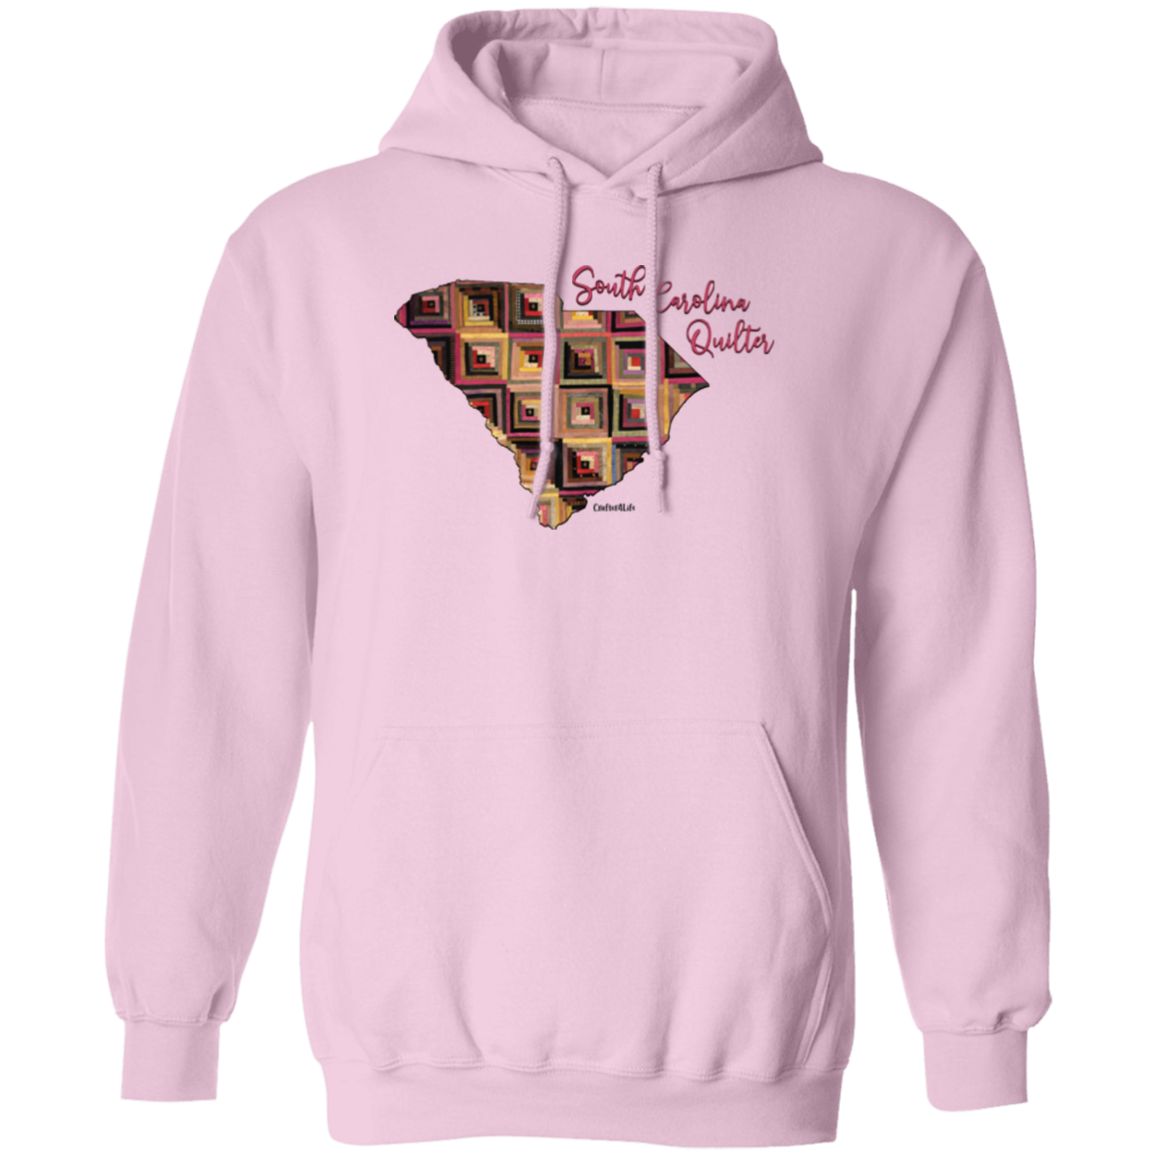 South Carolina Quilter Pullover Hoodie, Gift for Quilting Friends and Family